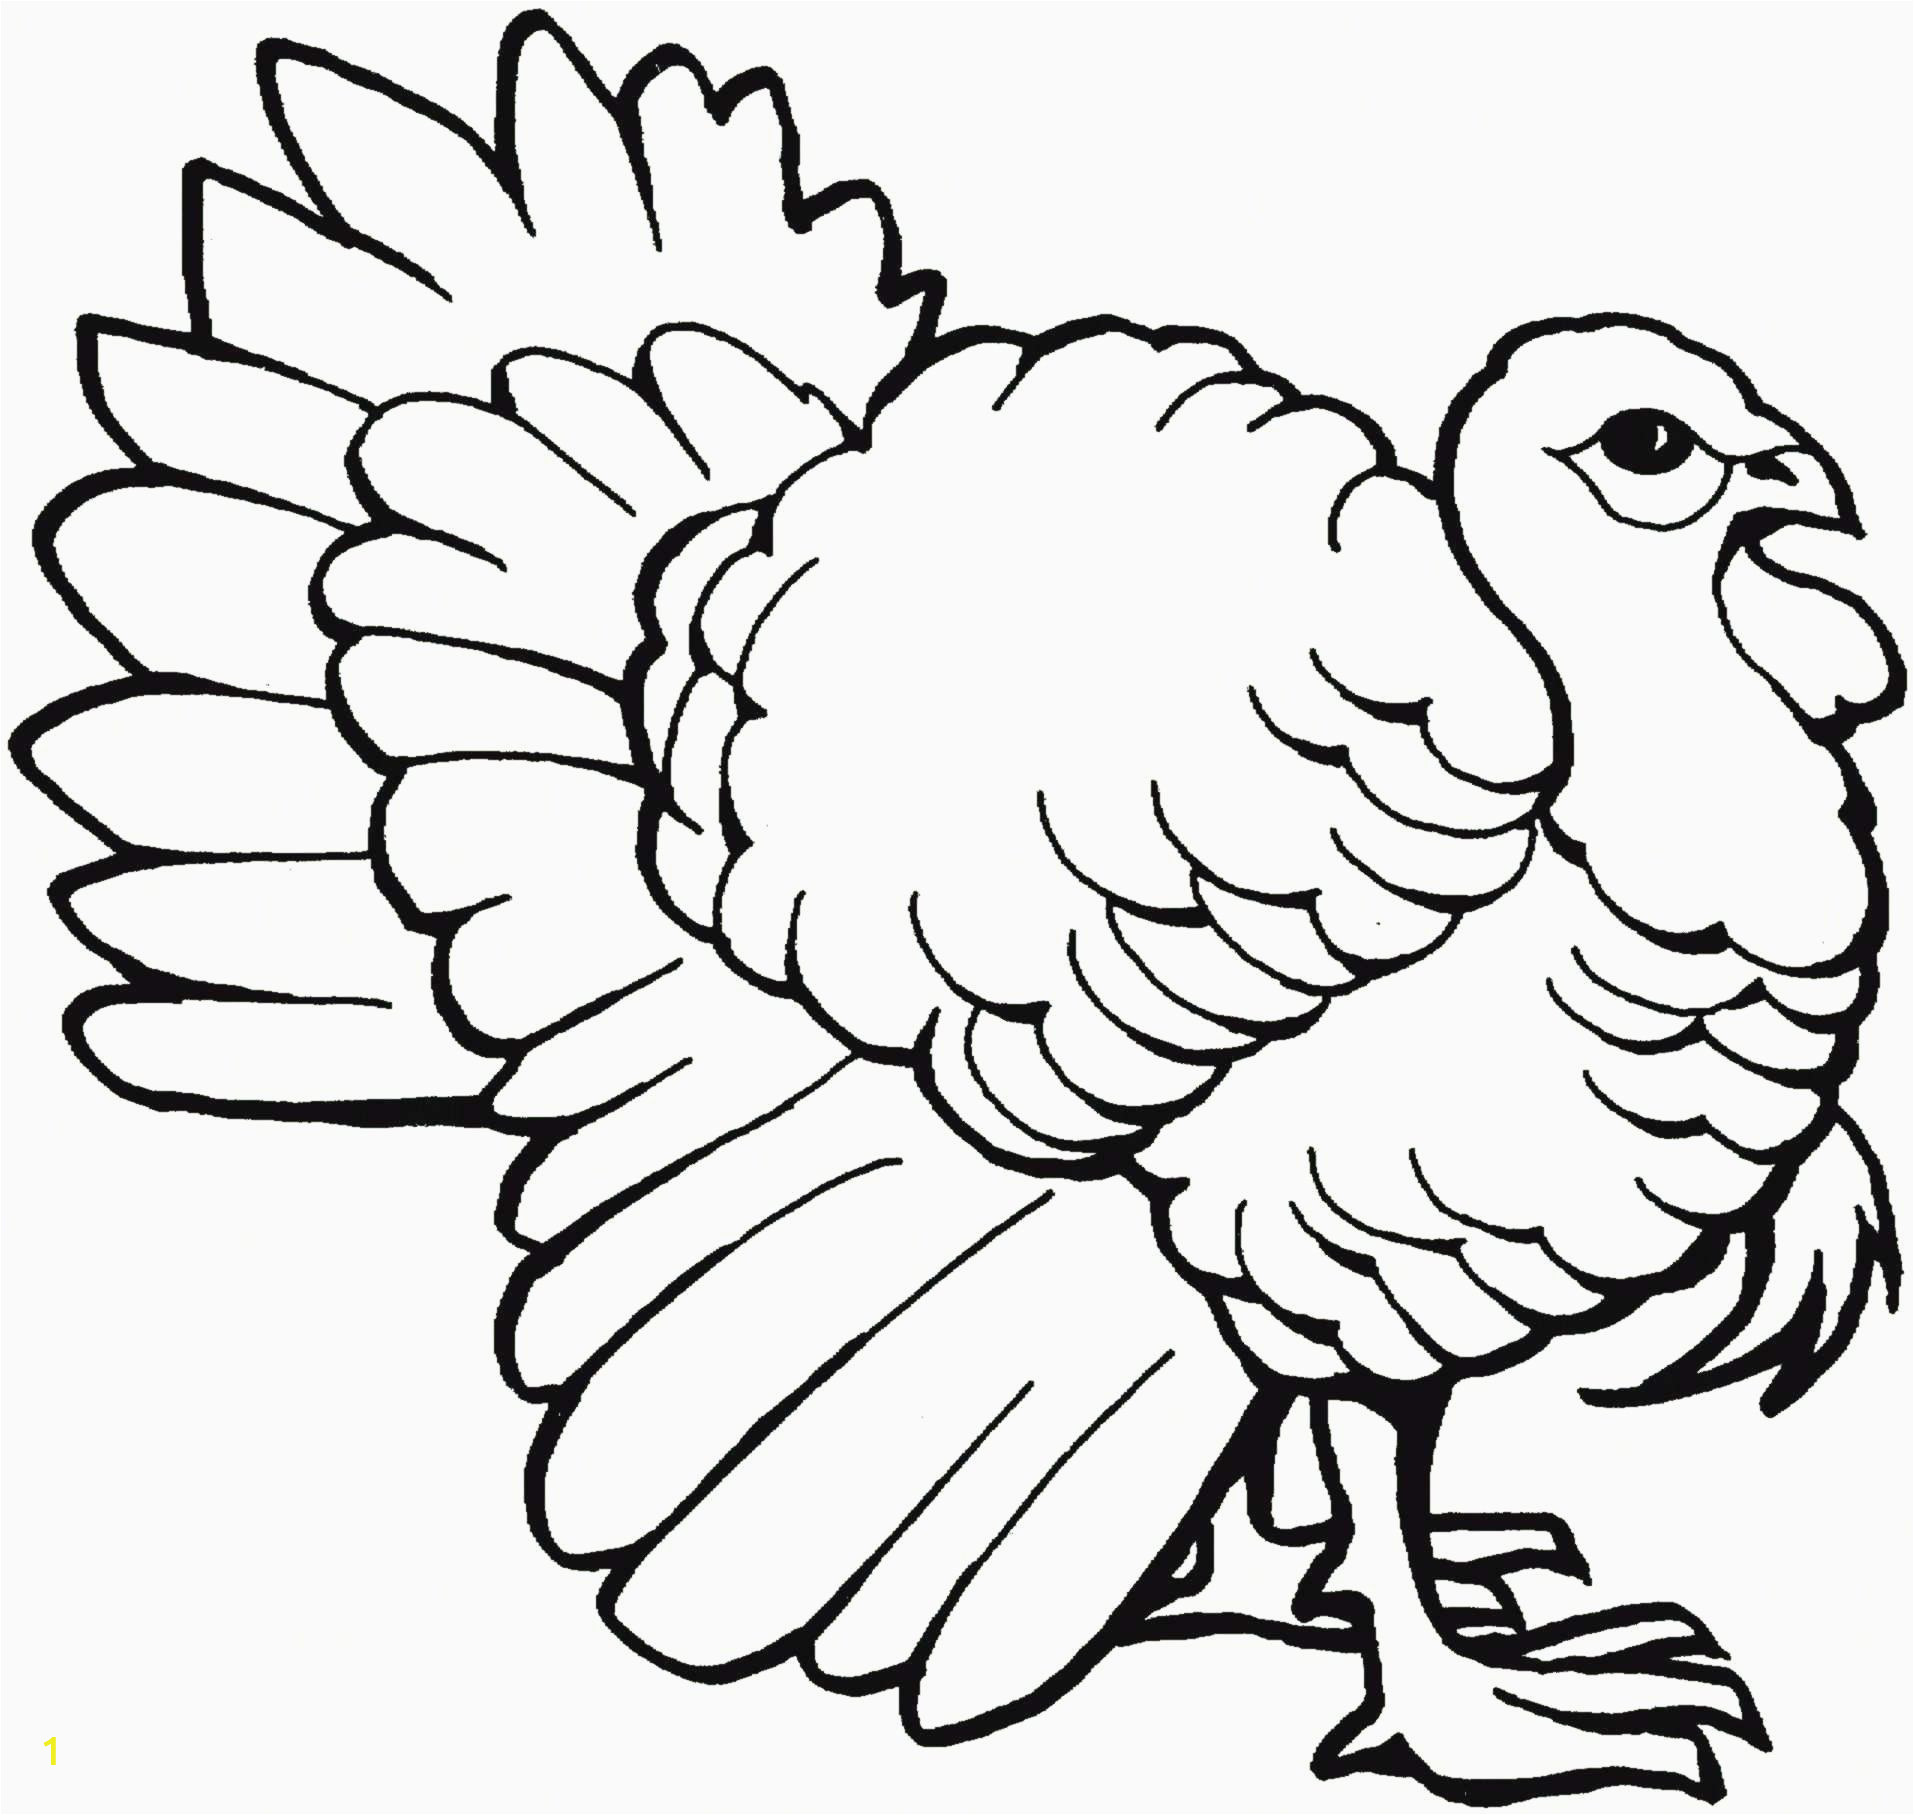 Wild Turkey Coloring Page Color by Number Thanksgiving Coloring Pages Luxury Luxury